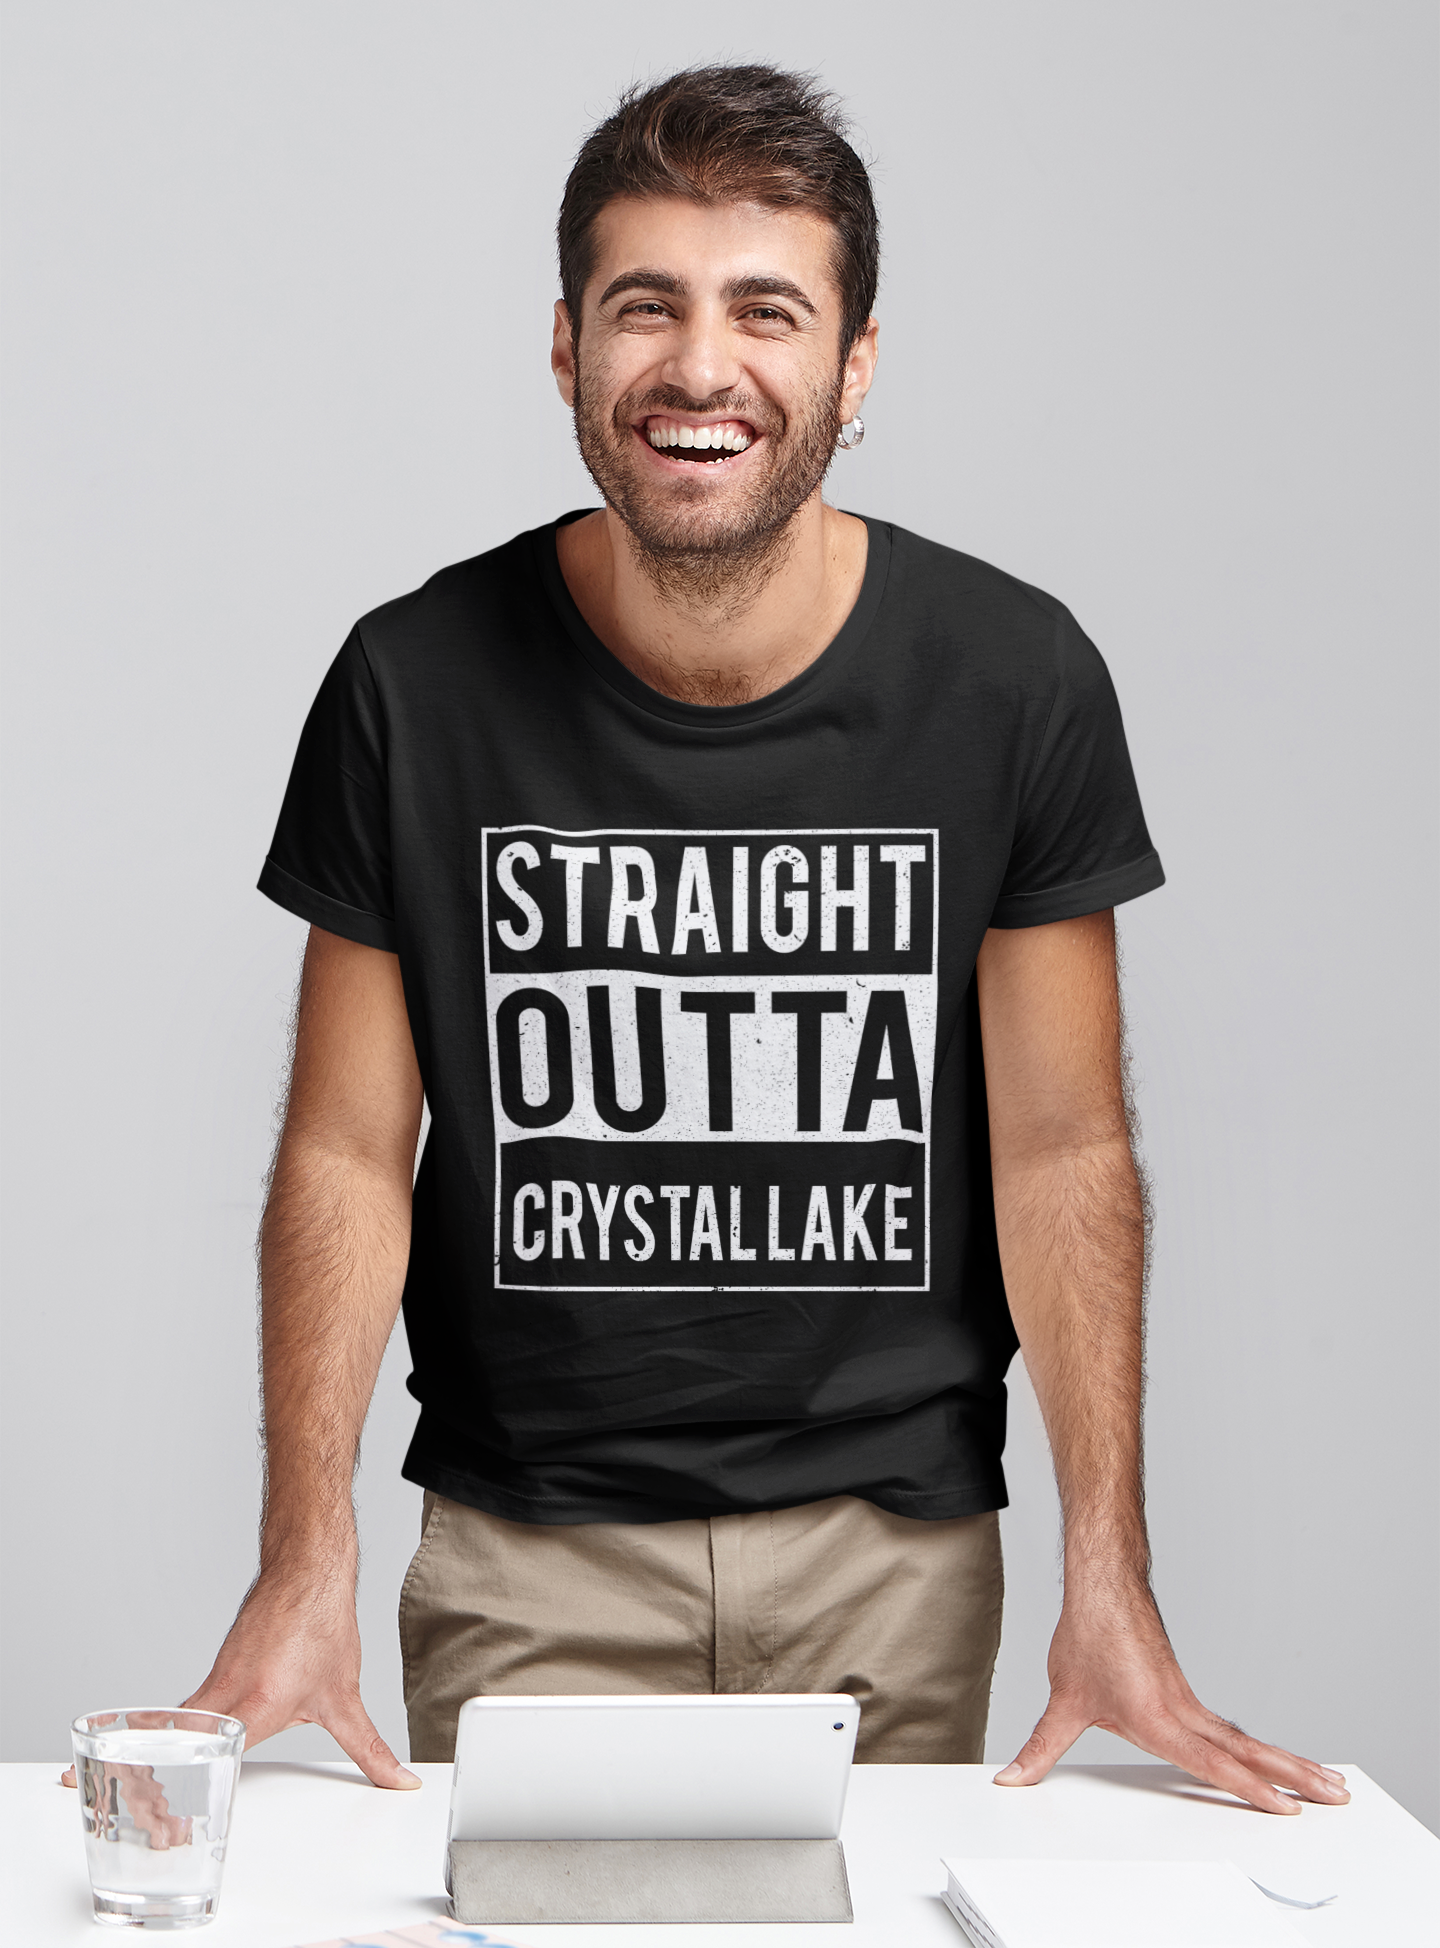 Friday 13th T Shirt, Straight Outta Crystallake T Shirt, Halloween Gifts